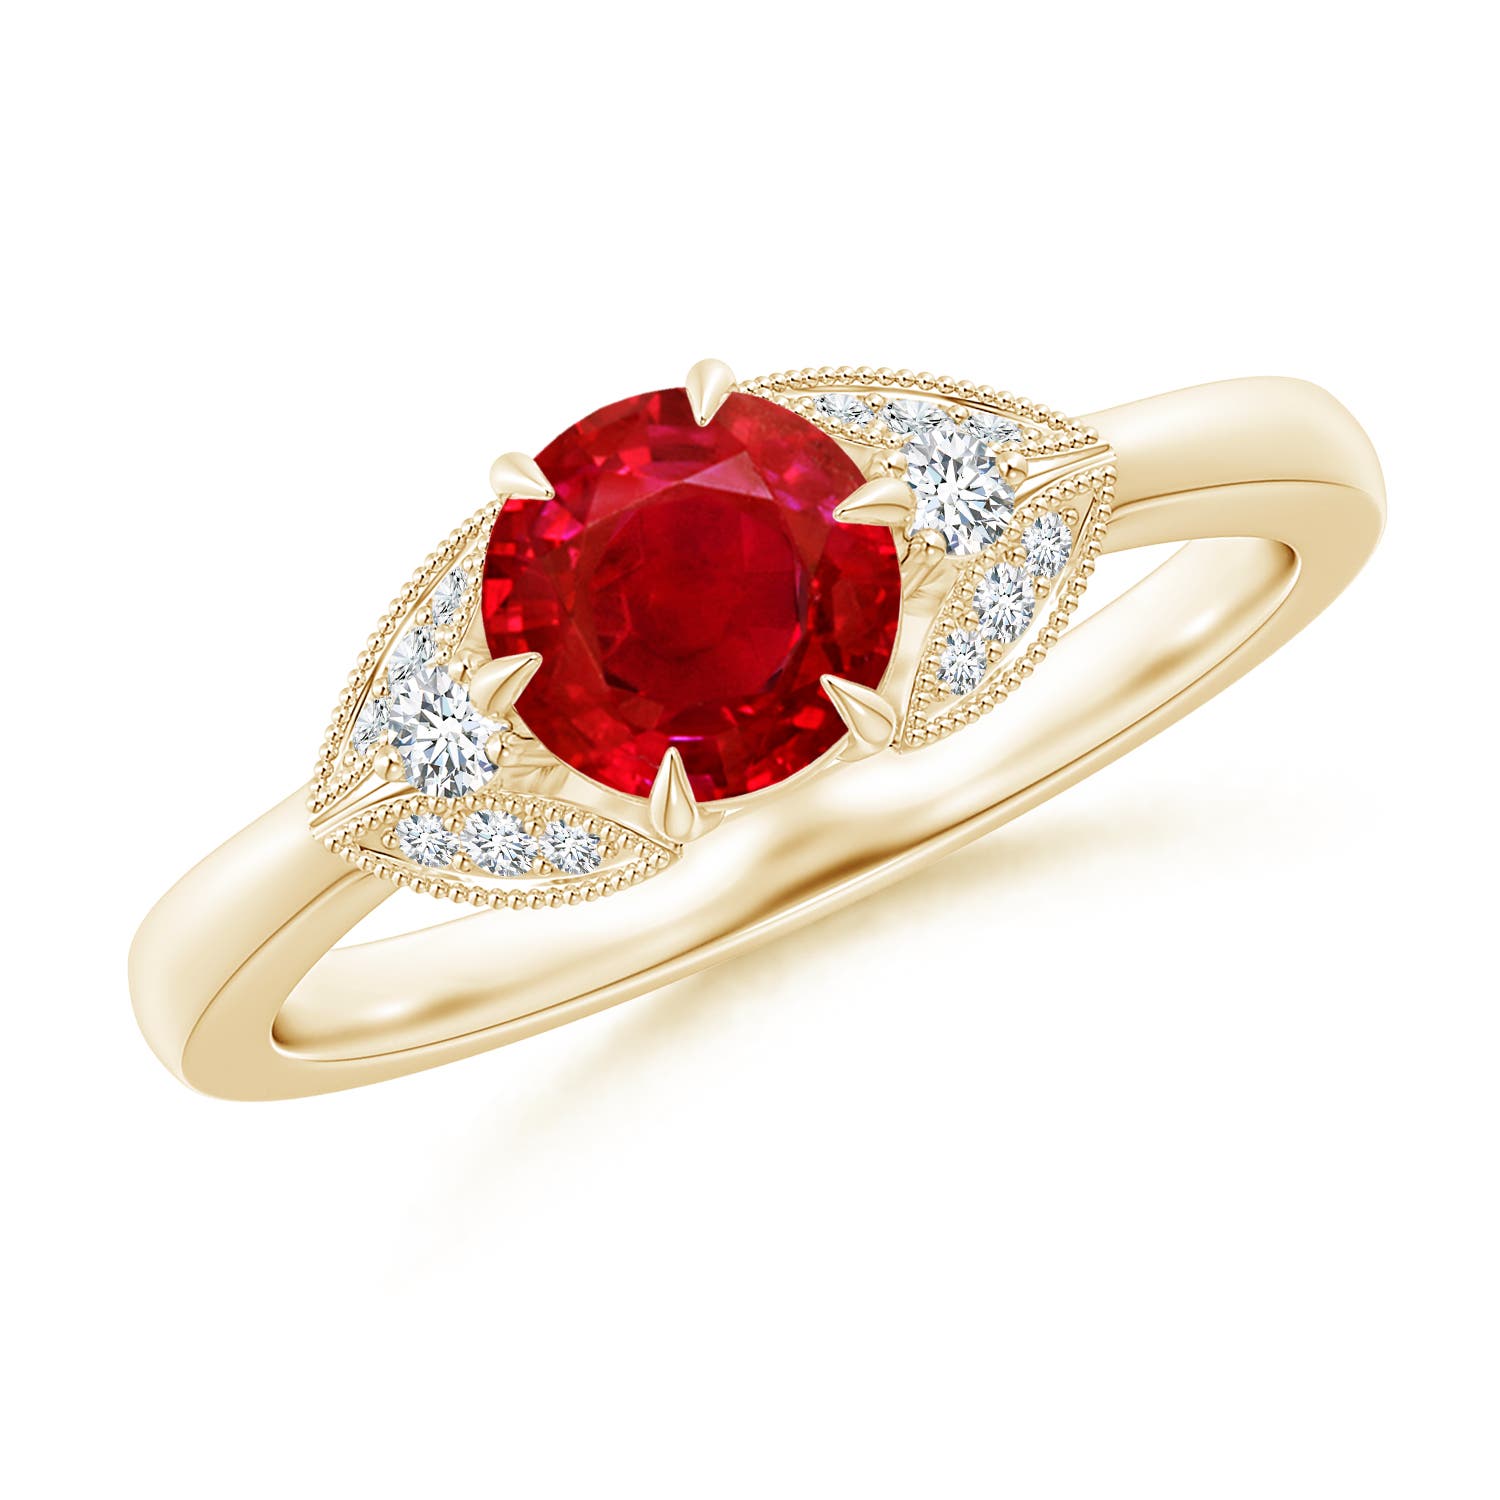 AAA - Ruby / 1.1 CT / 14 KT Yellow Gold